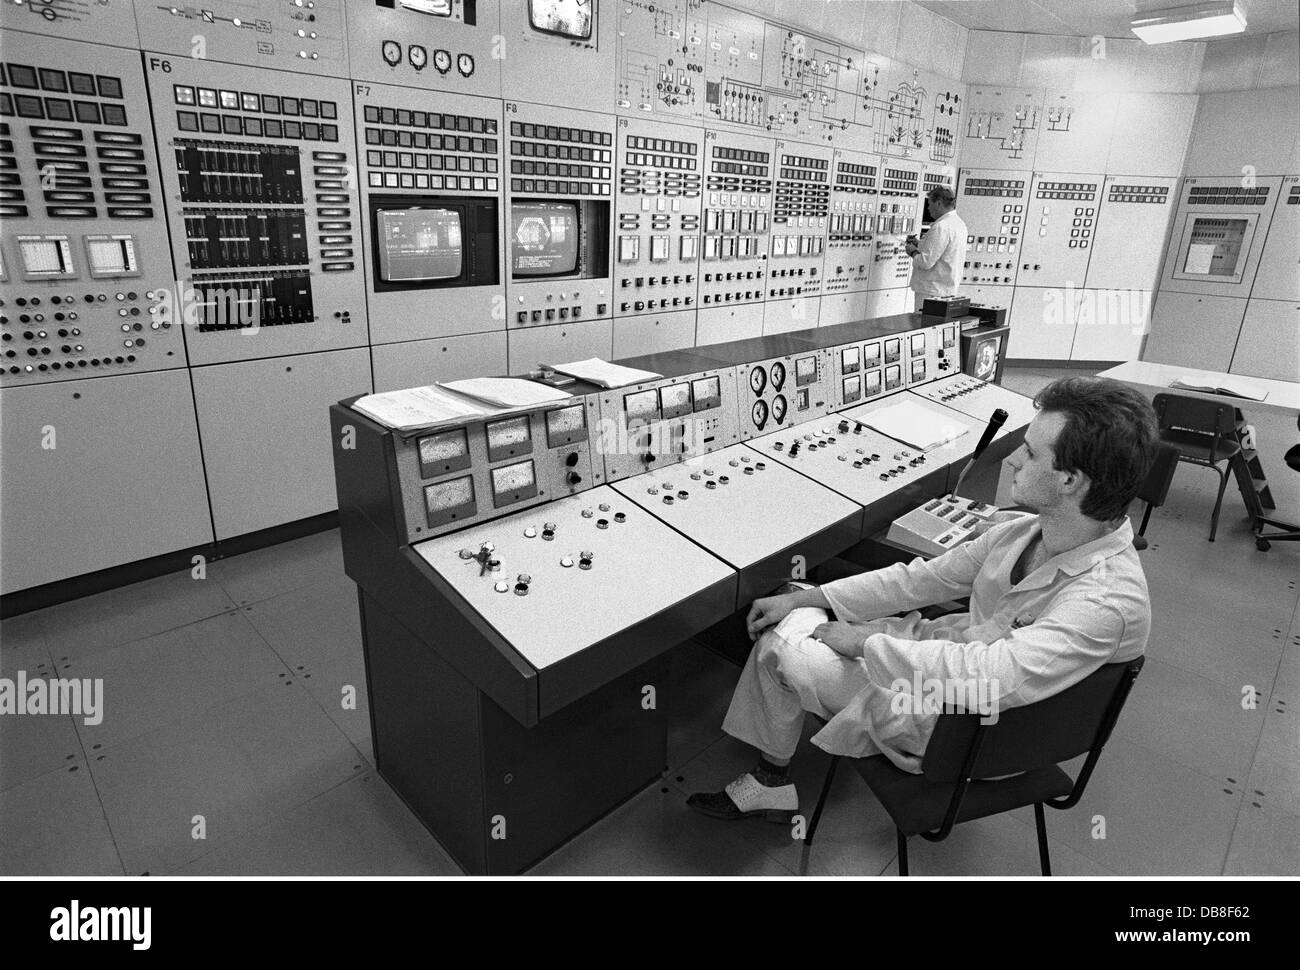 energy, nuclear power, nerve centre of the research reactor of the type WWR-S, in the nuclear research centre, powered by the central institute for nuclear physics, in operation since 1957, Russian construction type, power 10 MW, switched off in the June 1991, Rossendorf near Dresden, East-Germany, 30.5.1990, Additional-Rights-Clearences-Not Available Stock Photo